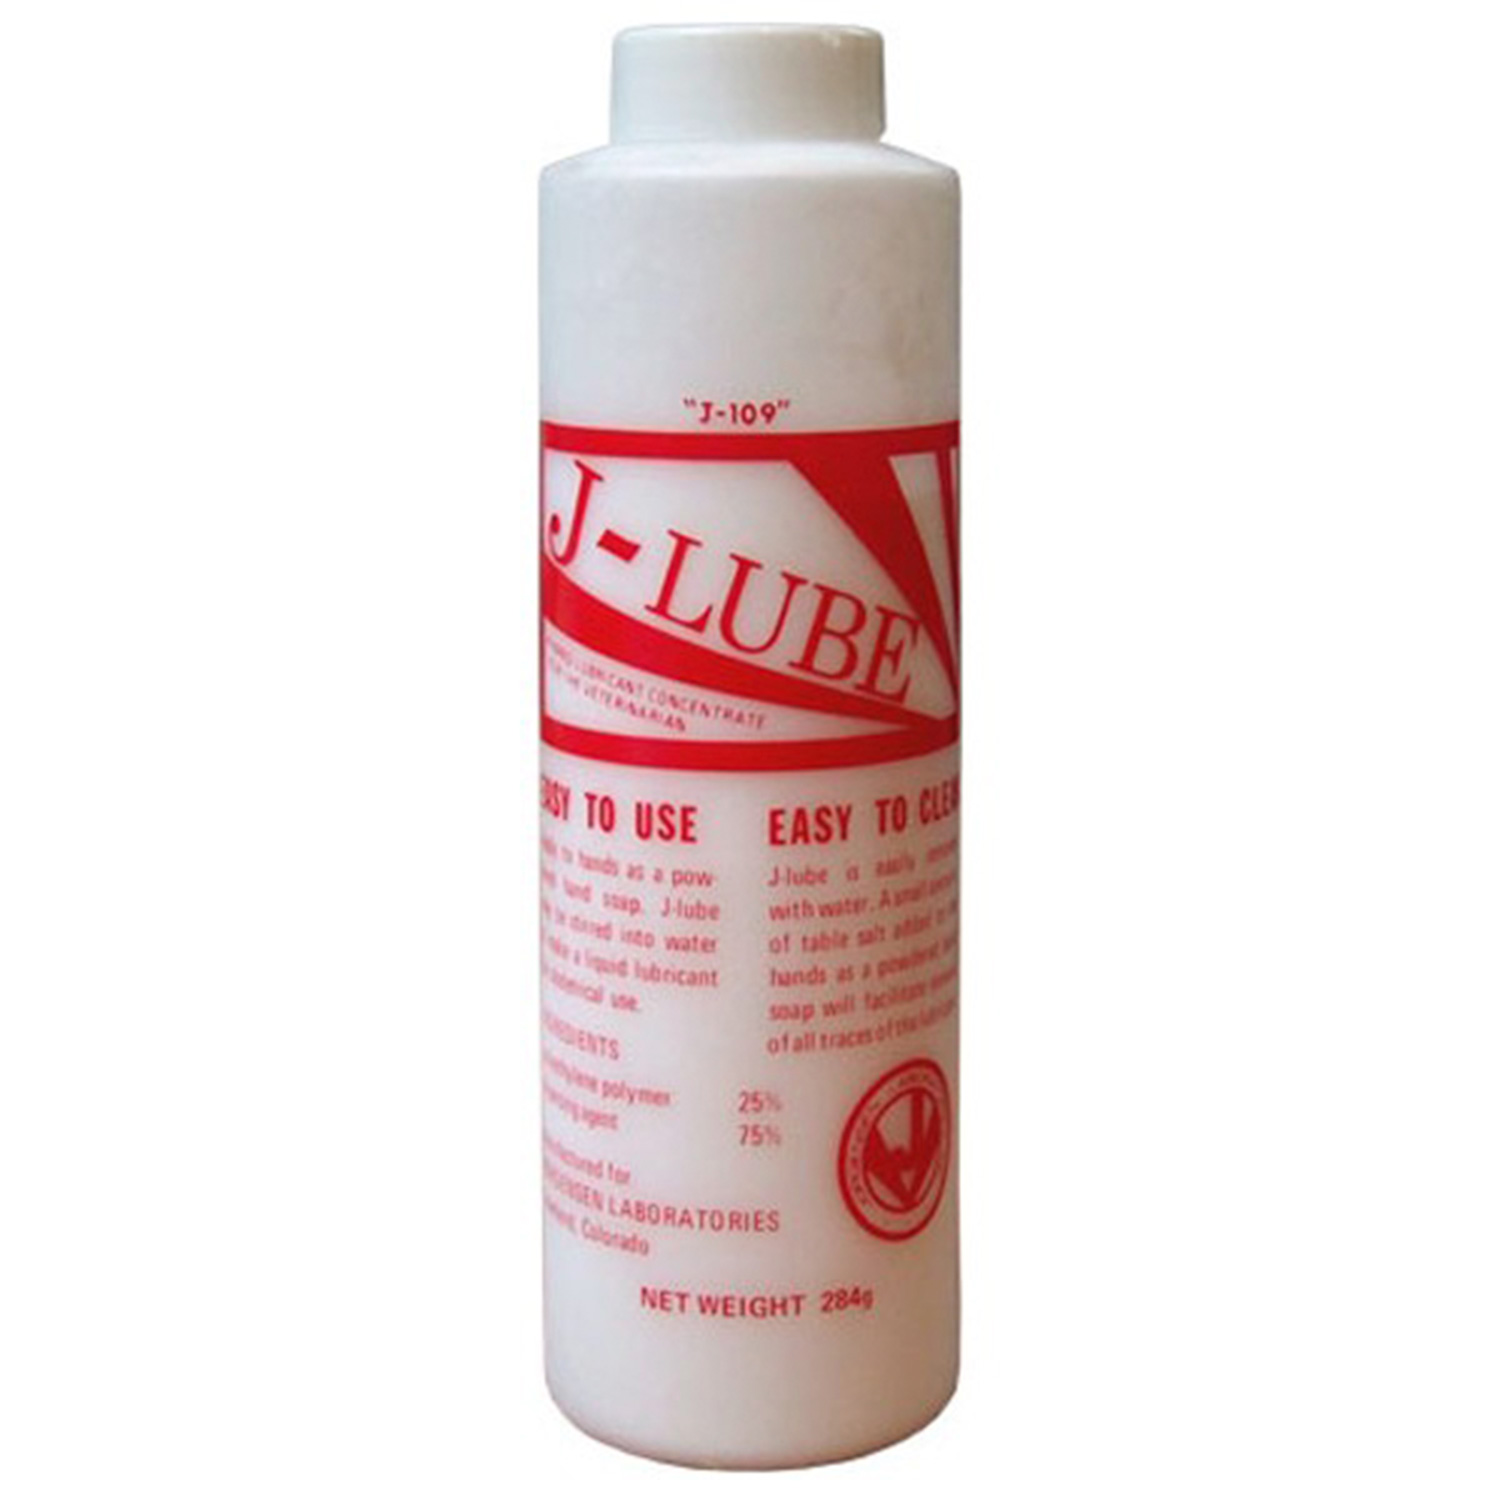 J-Lube Pulver Glidmedel 284 g - Mixed